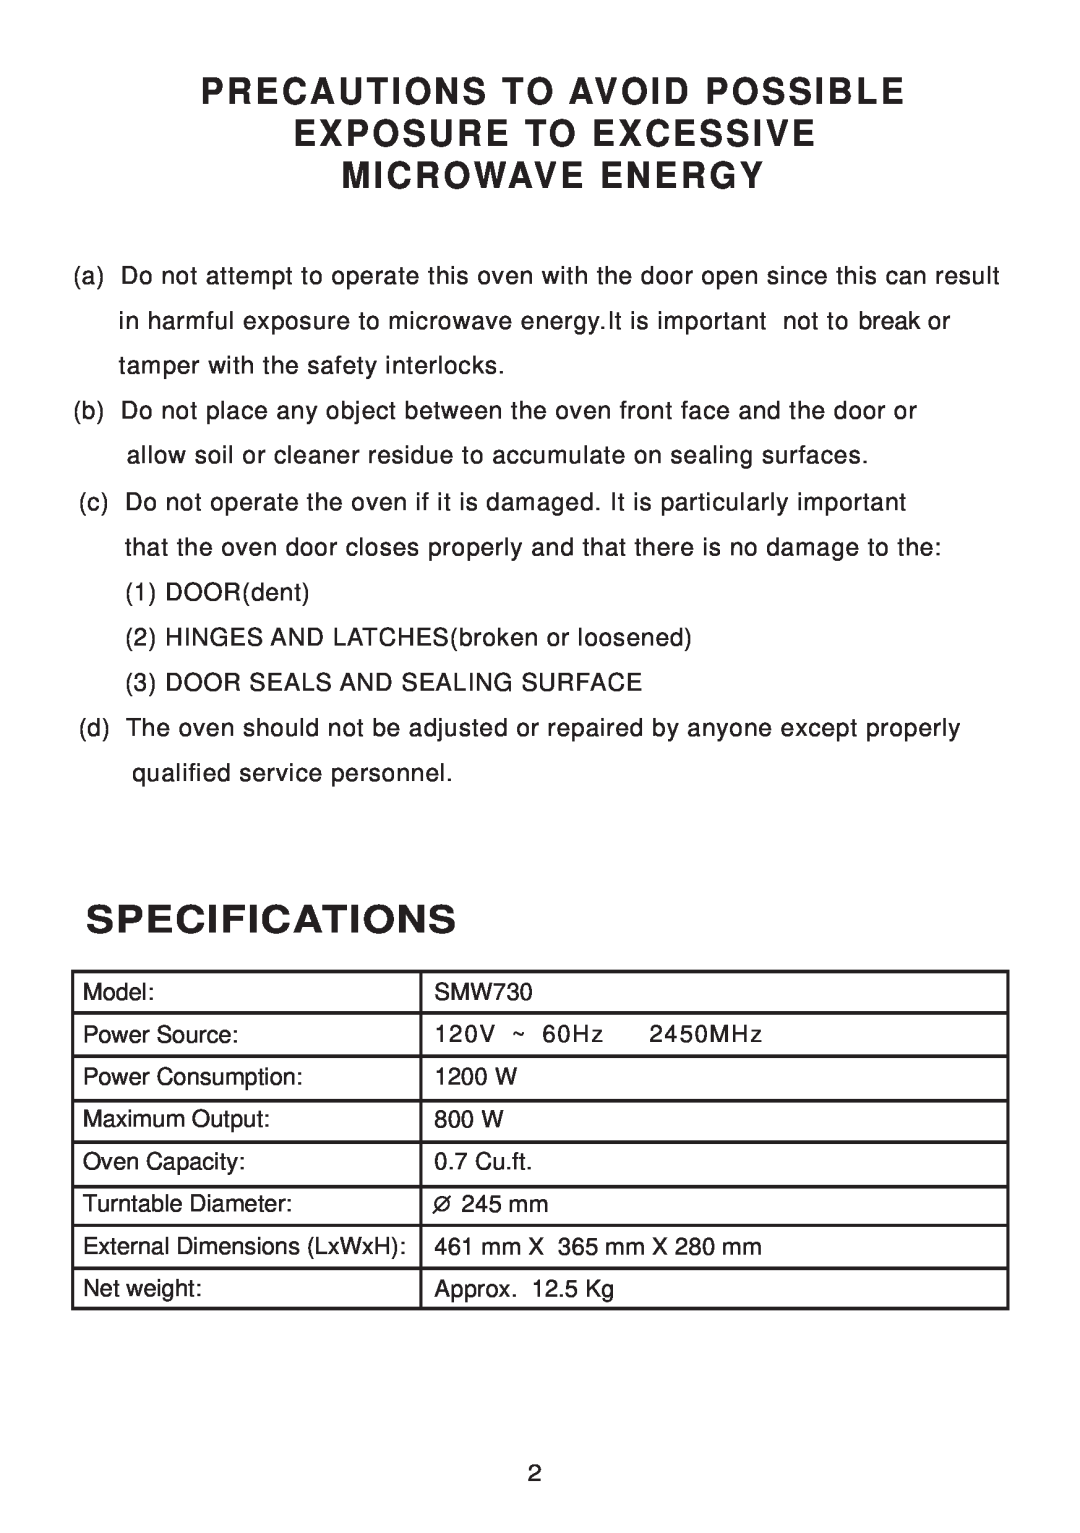 Sunbeam SMW730 instruction manual Specifications, Precautions To Avoid Possible Exposure To Excessive Microwave Energy 